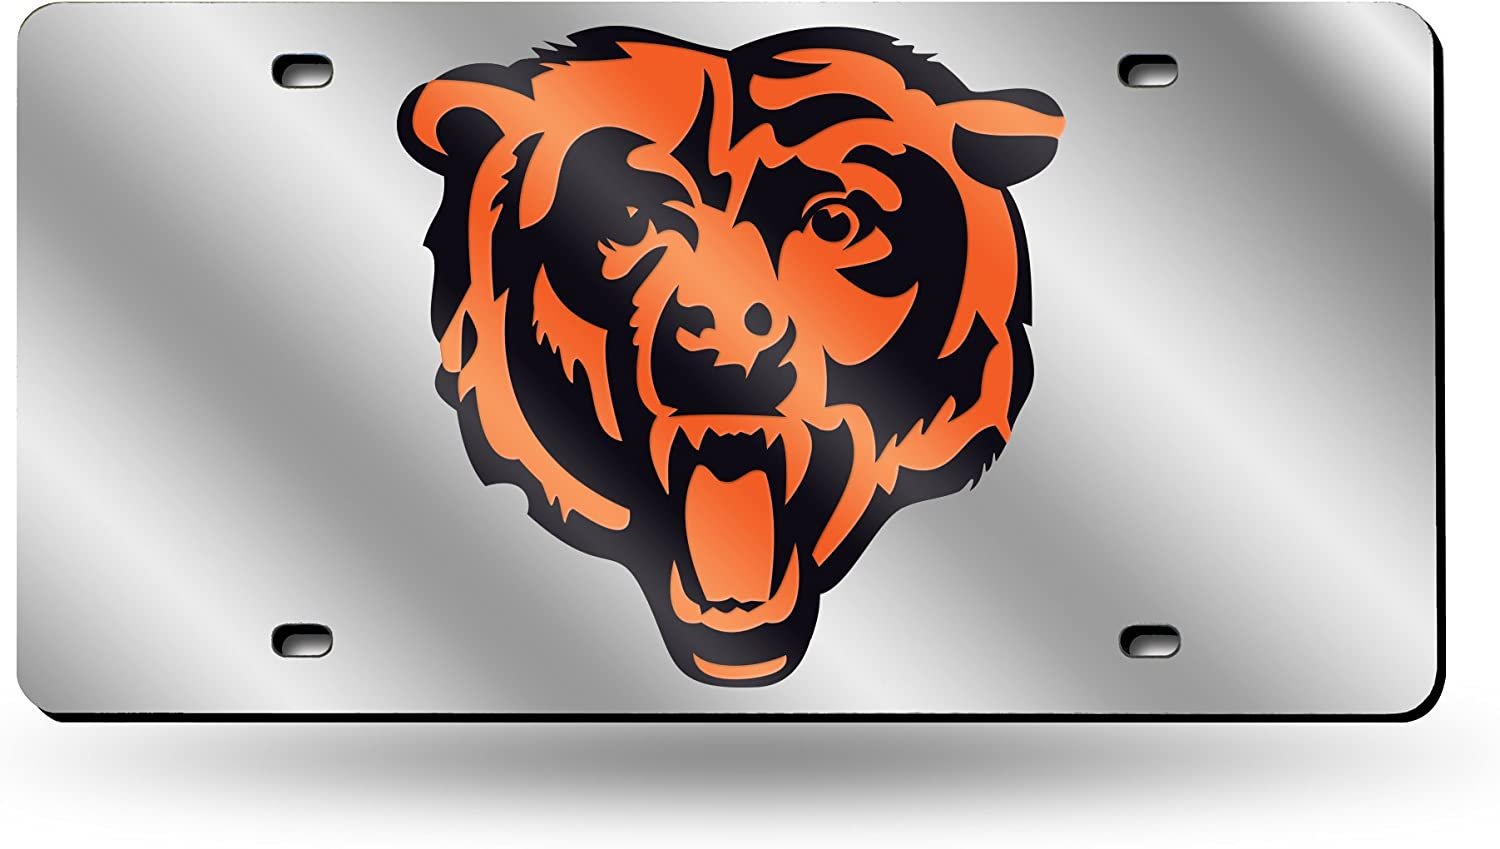 Chicago Bears Premium Laser Cut Tag License Plate, Mascot, Mirrored Acrylic Inlaid, 12x6 Inch